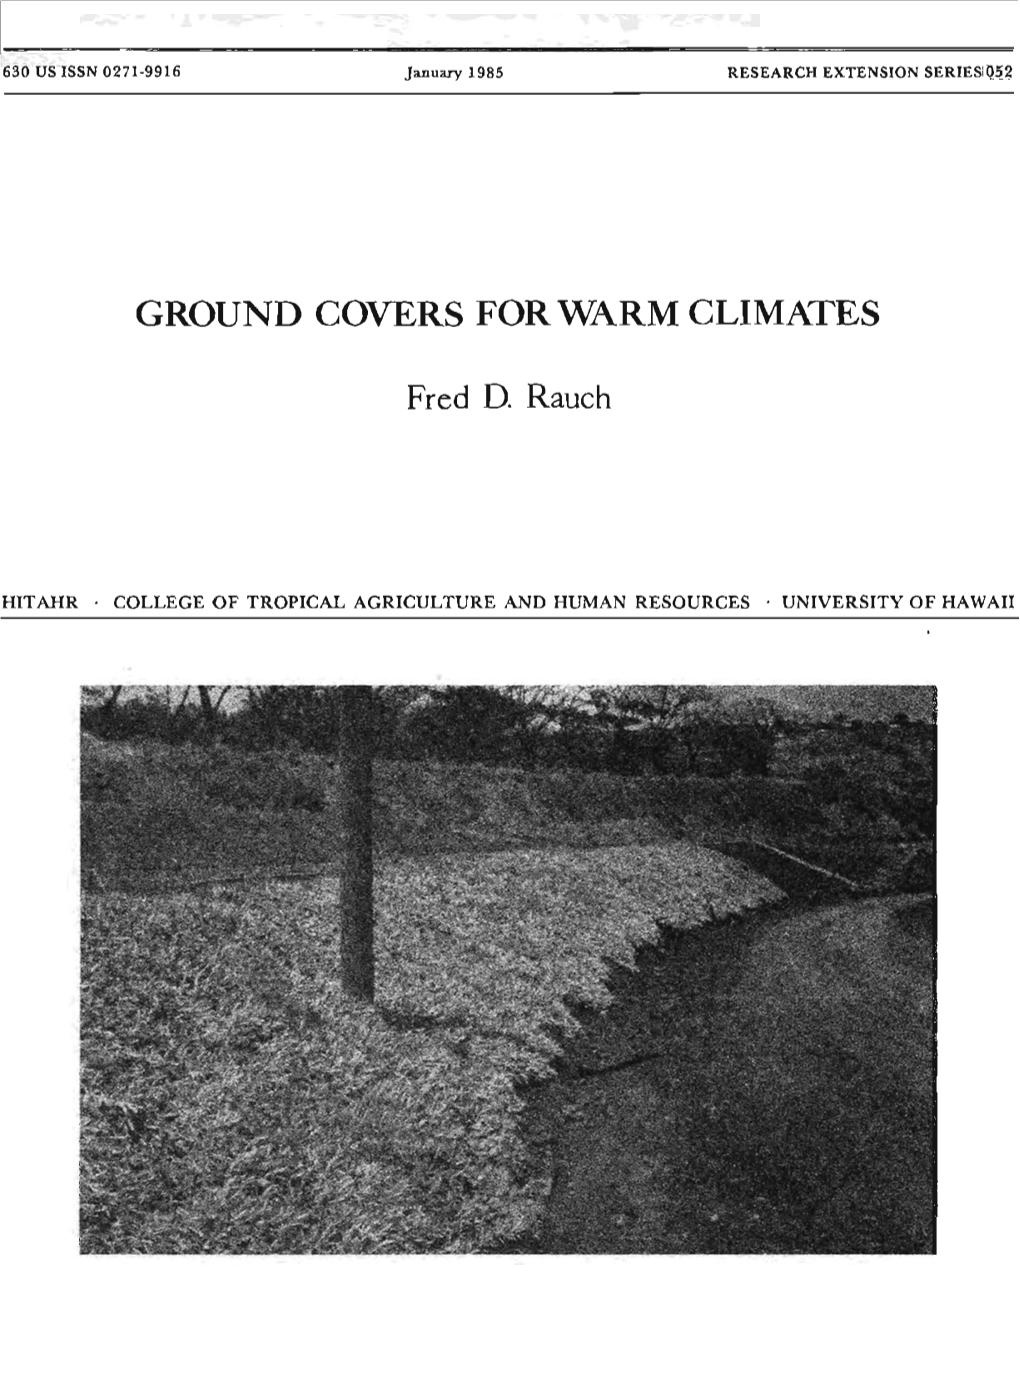 Ground Covers Forwarm Climates